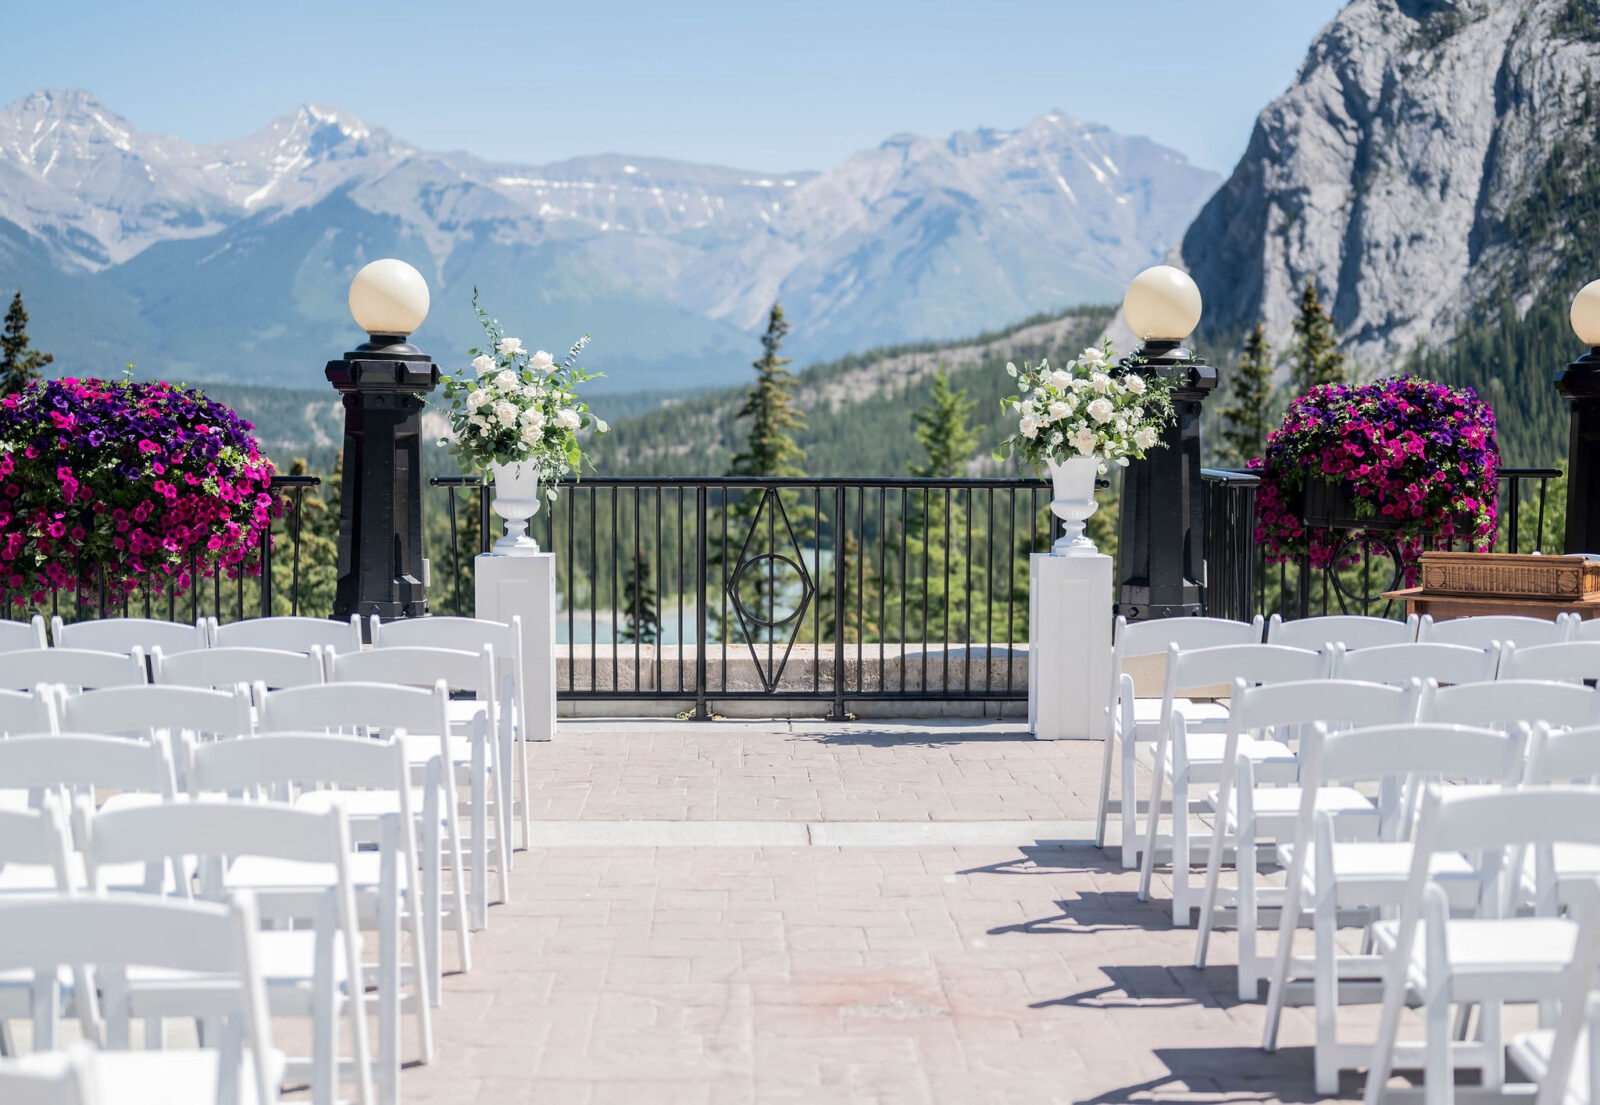 Banff summer wedding ceremony inspiration at the Fairmont Banff Springs, white florals with greenery on pedestals overlooking mountain view.